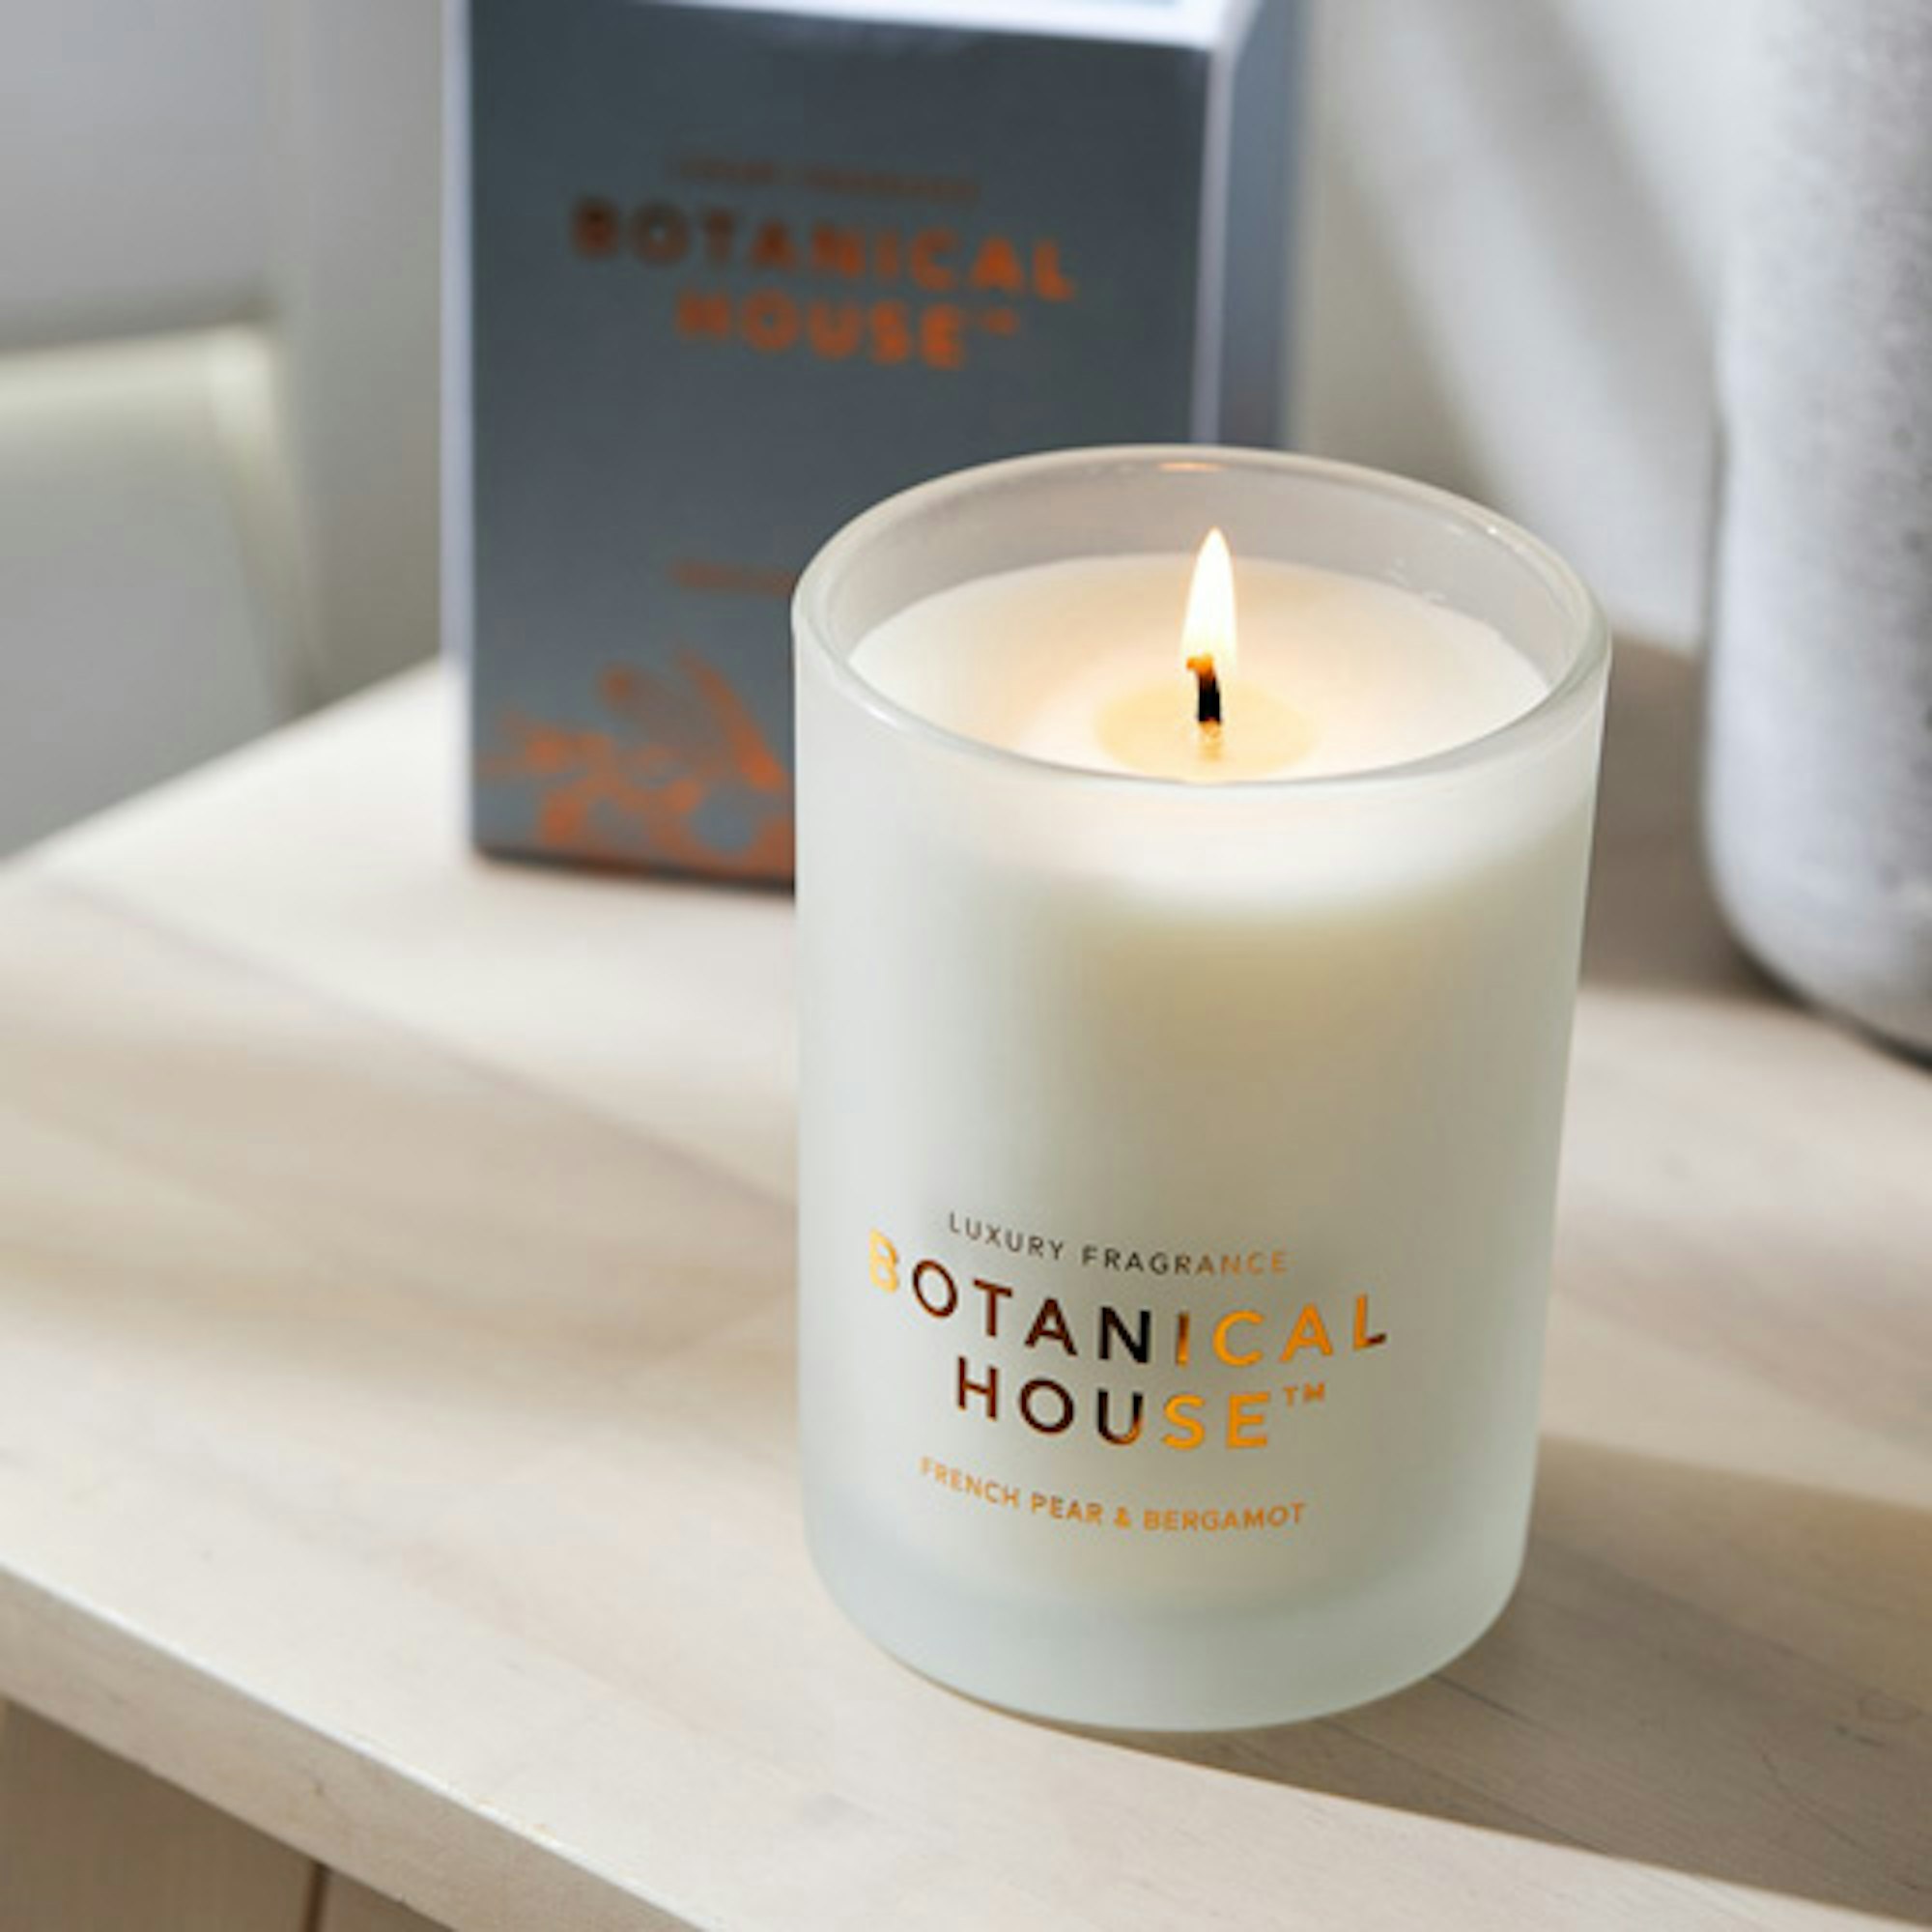 Botanical House scented candle. Lit candle with soft background.